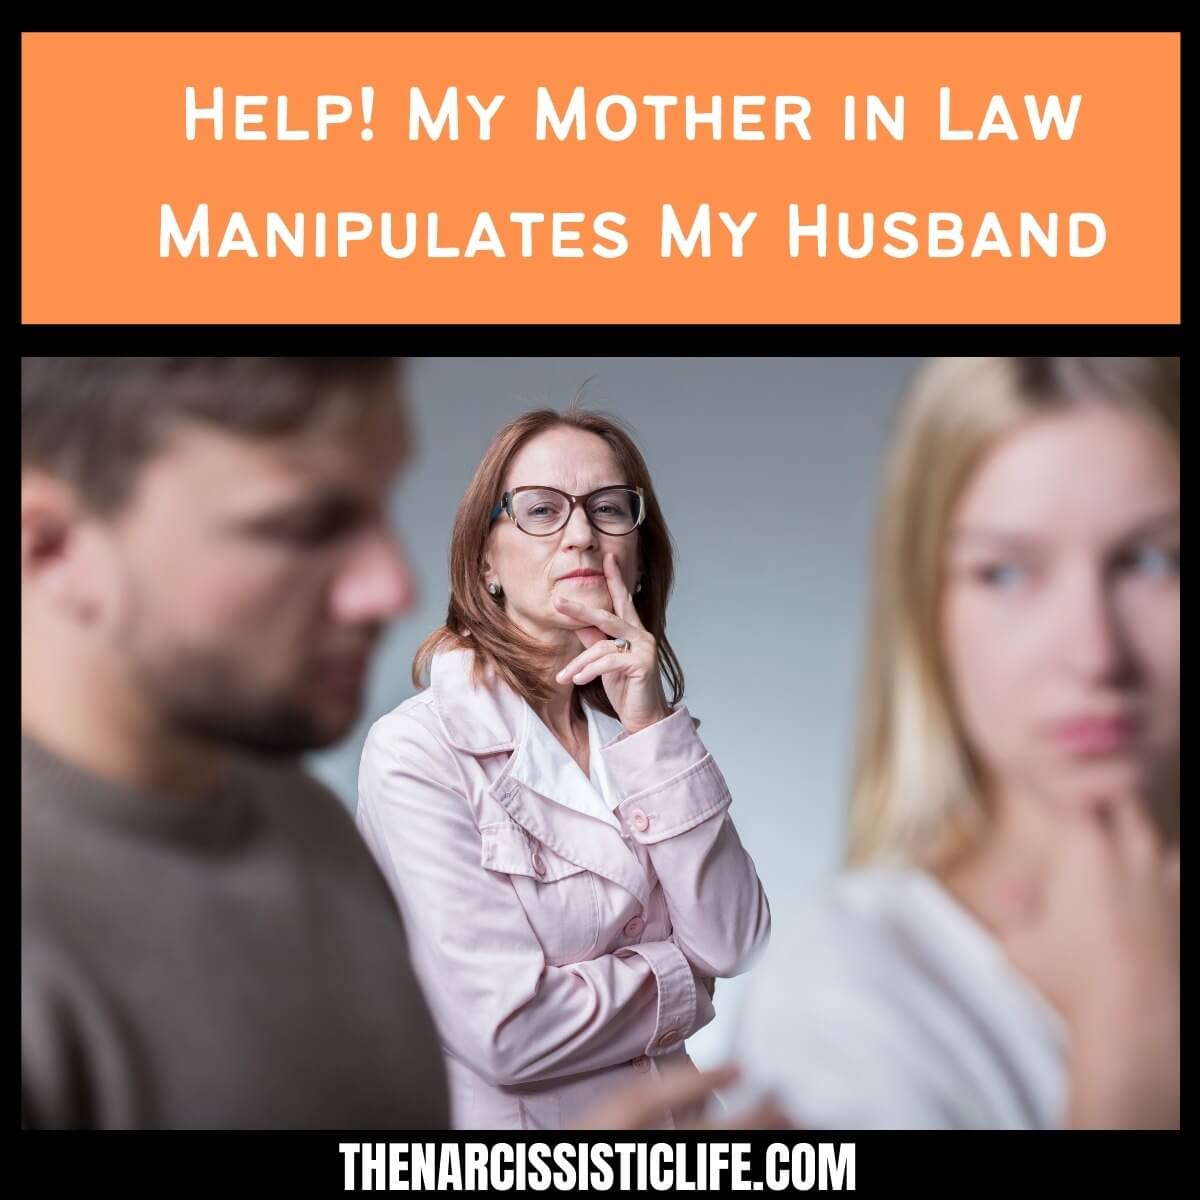 Help! My Mother in Law Manipulates My Husband